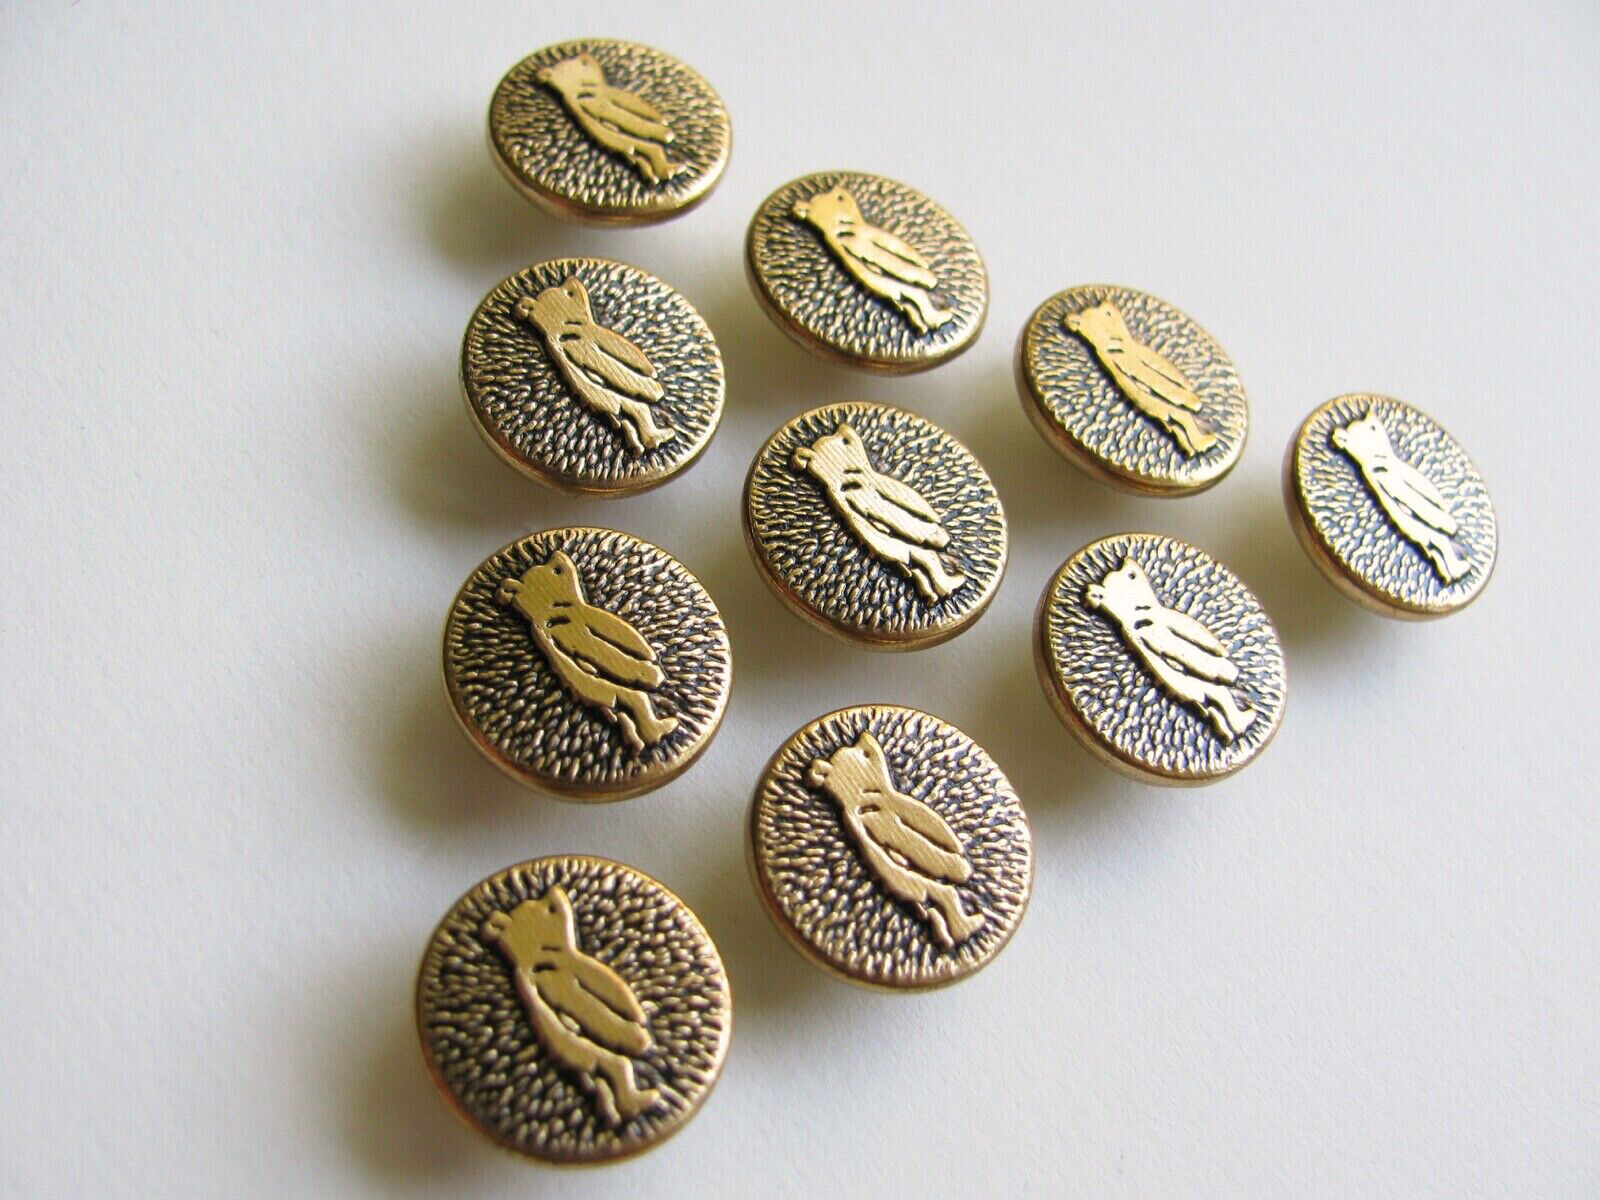 Vintage NOS Metal Classic Winnie the Pooh Buttons 2-Piece Gold Tone 10 Piece Lot Без бренда